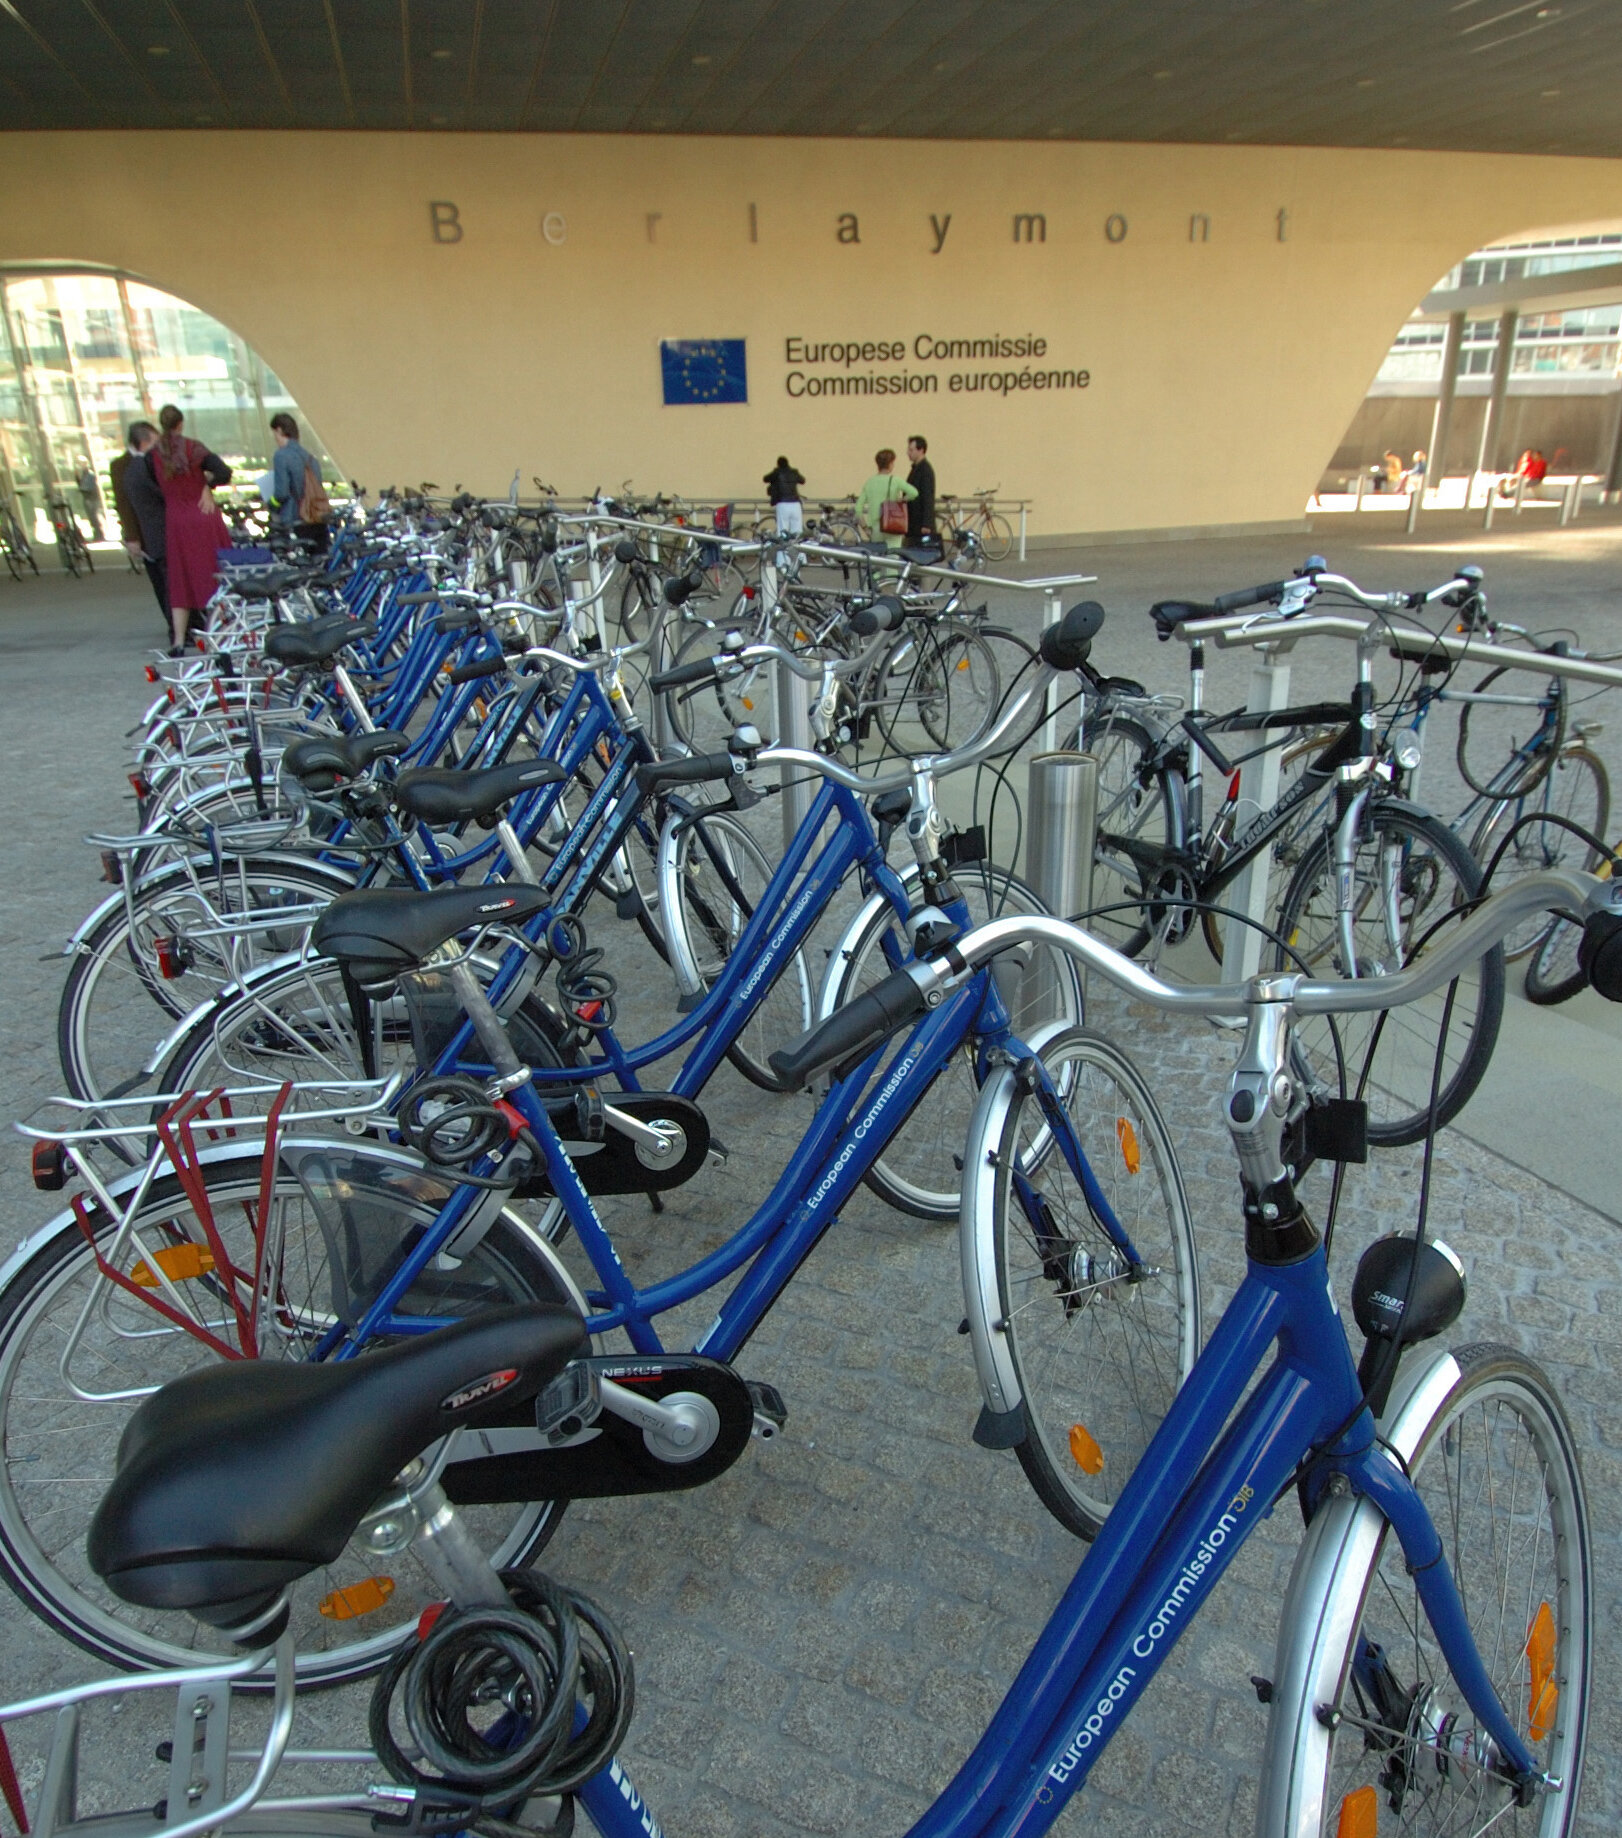 Bicycles in front of the Berlaymont Building